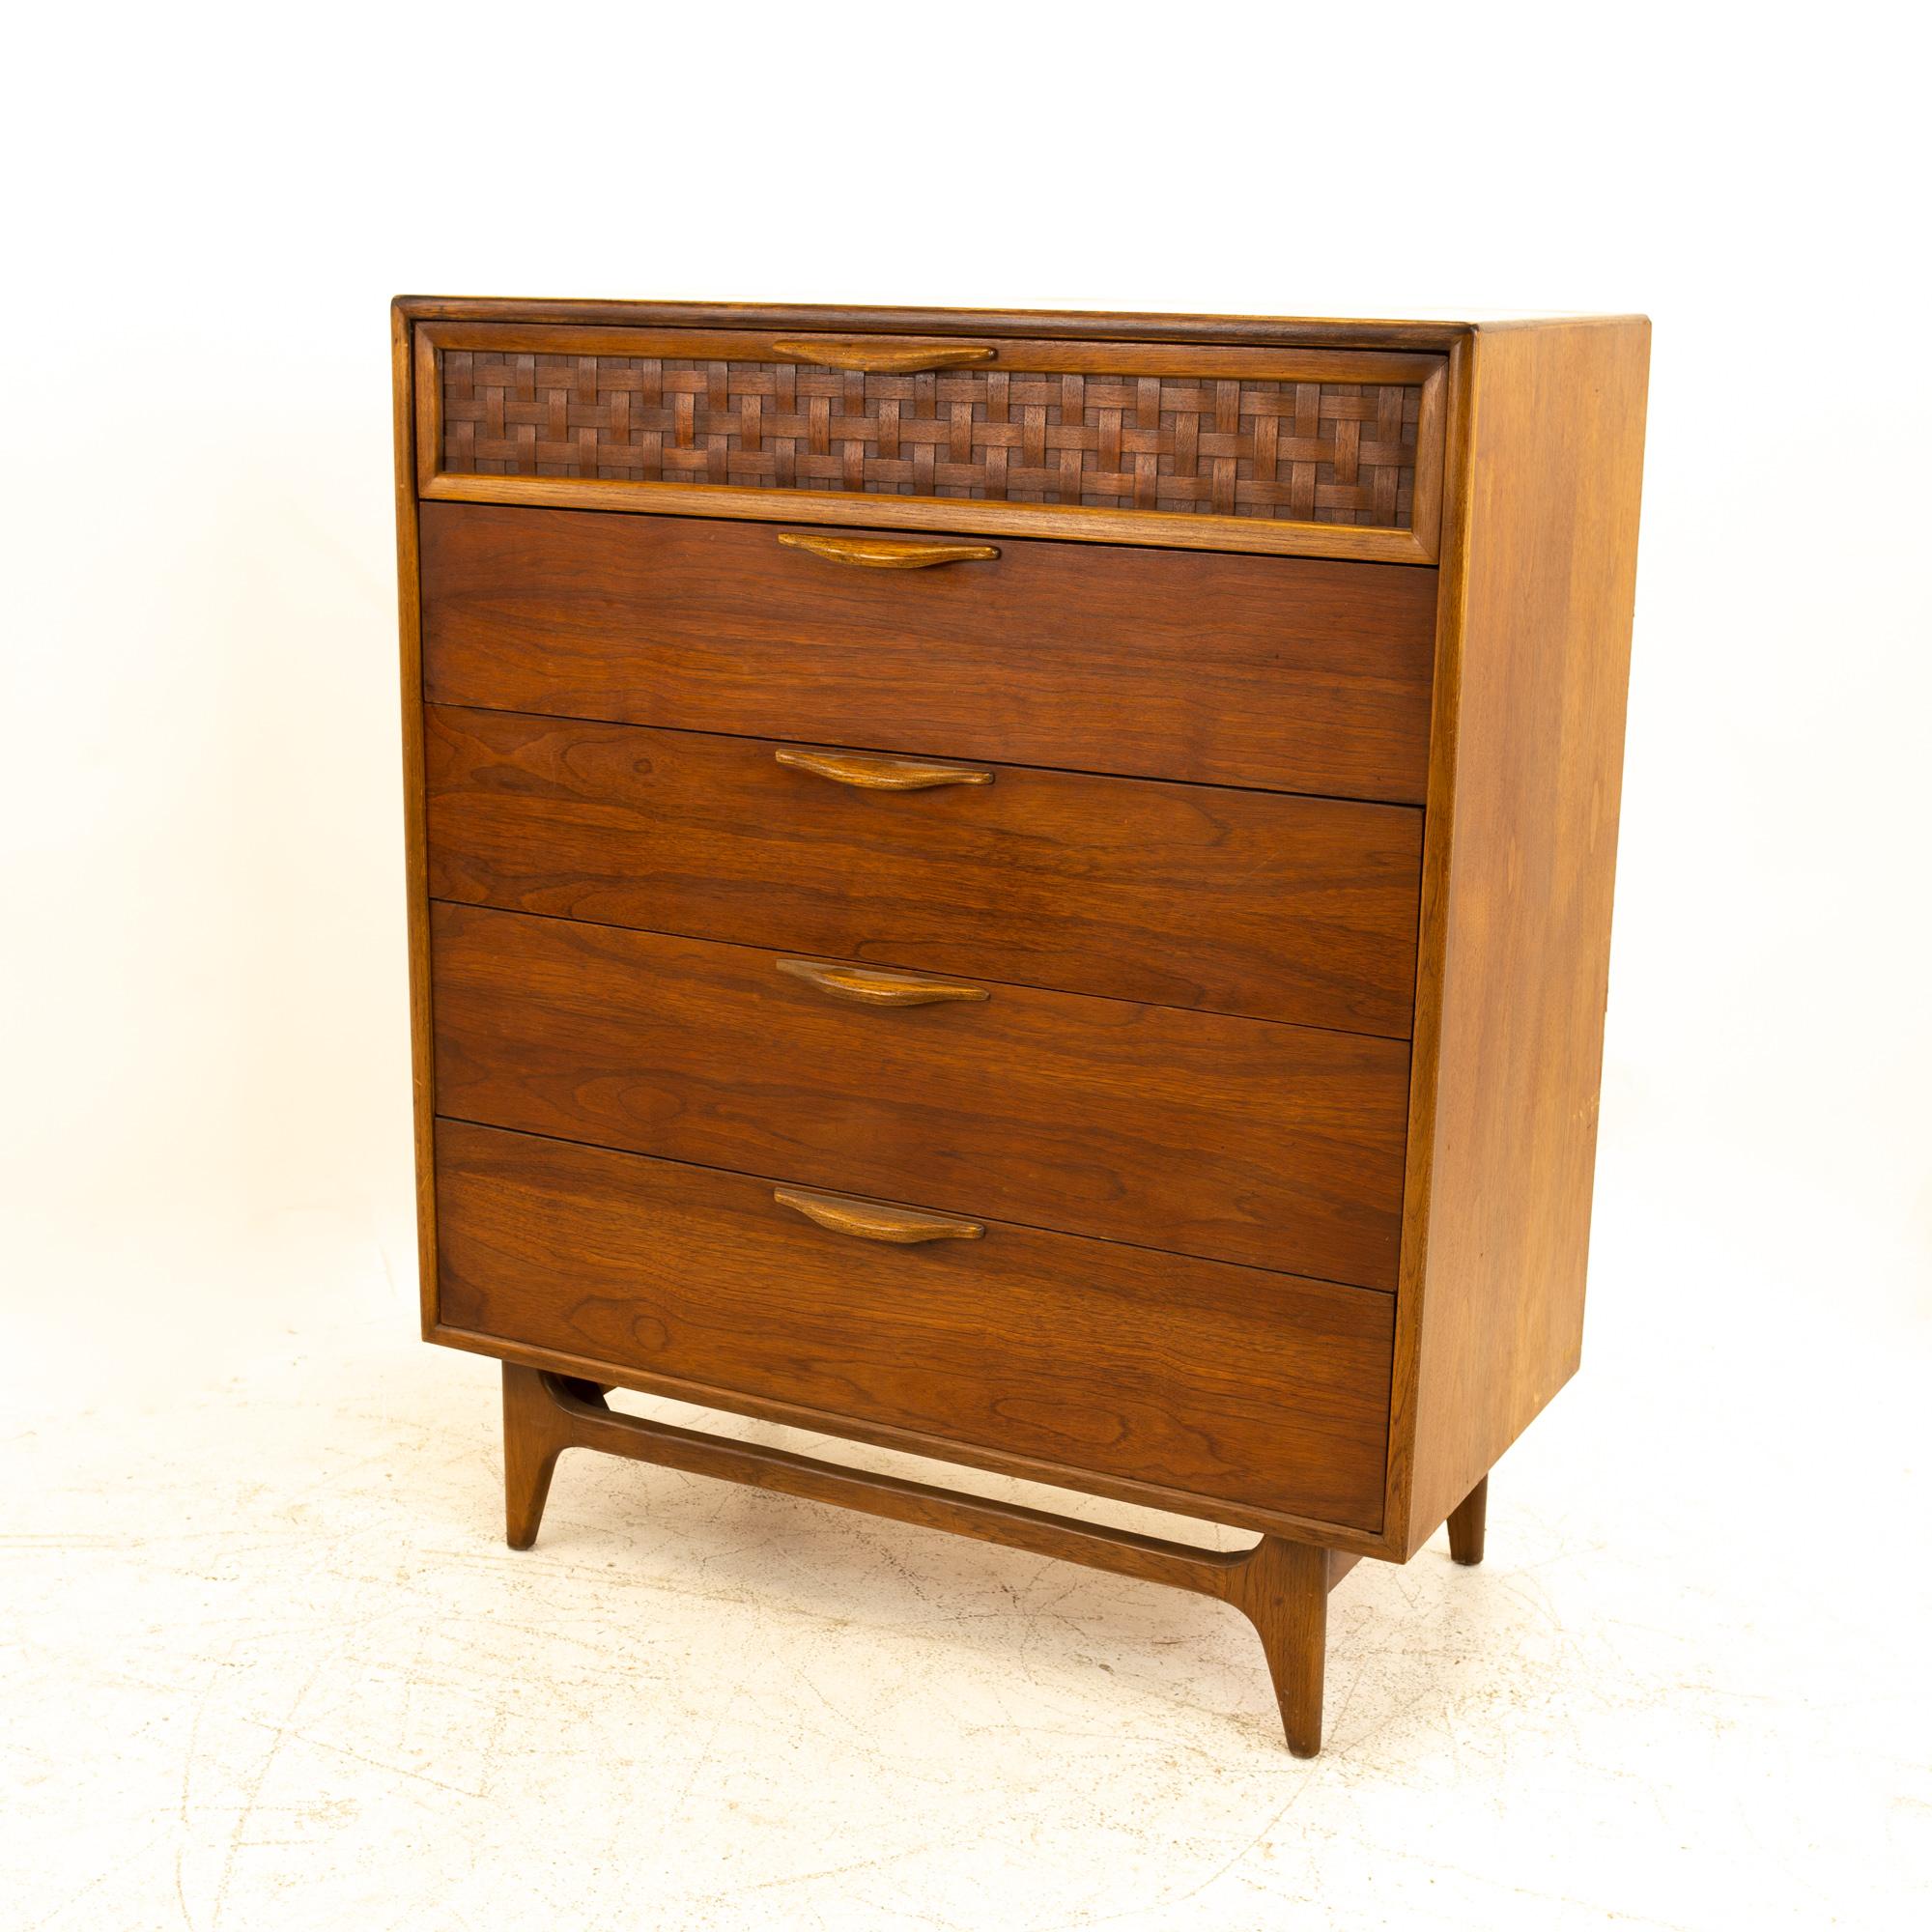 Lane perception mid century 5 drawer highboy dresser
Dresser measures: 38 wide x 19 deep x 45.75 high

All pieces of furniture can be had in what we call restored vintage condition. That means the piece is restored upon purchase so it’s free of